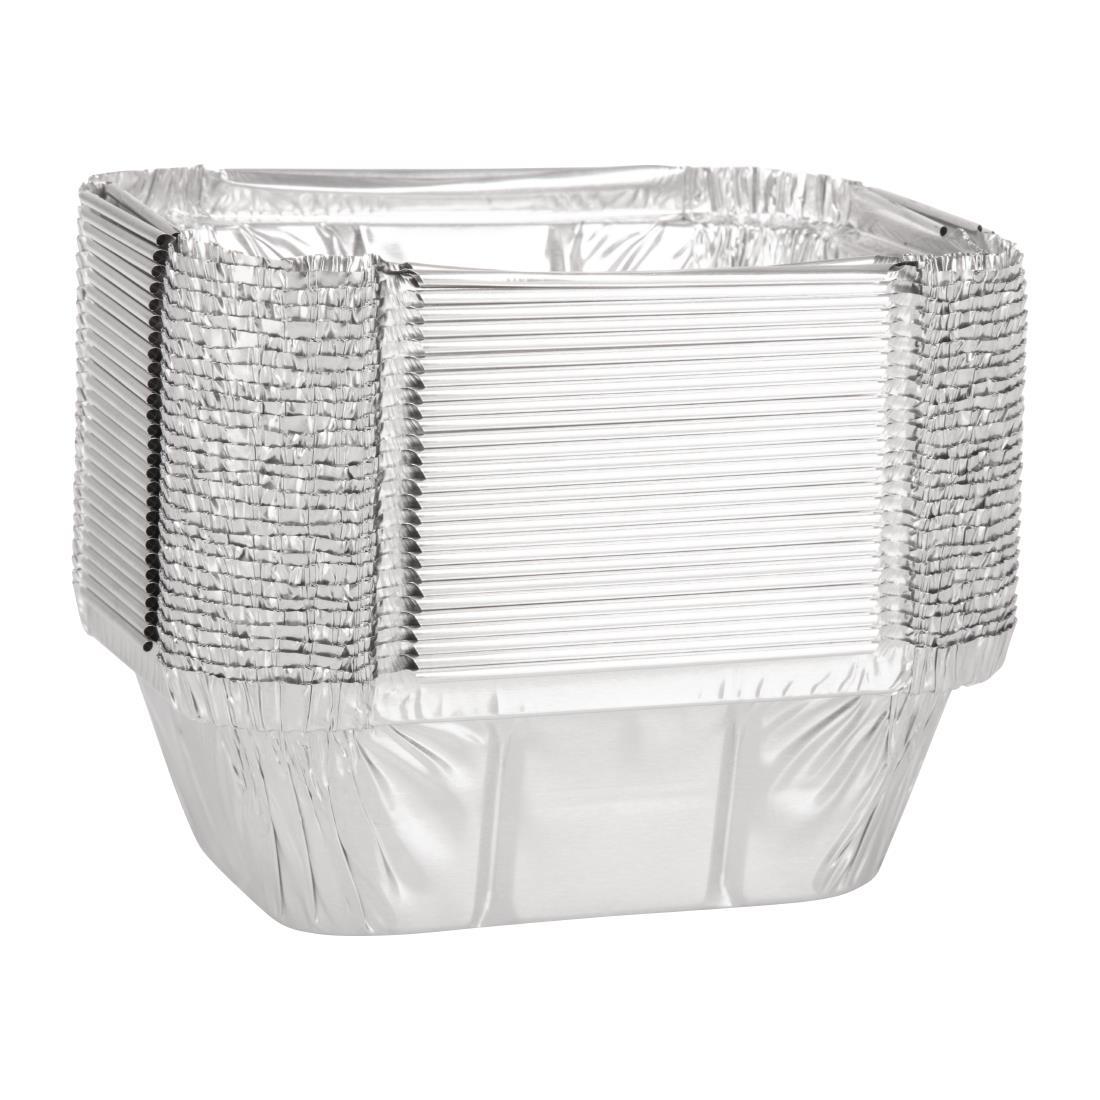 Fiesta Recyclable Foil Containers Small 260ml / 9oz (Pack of 1000) - CD947  - 3